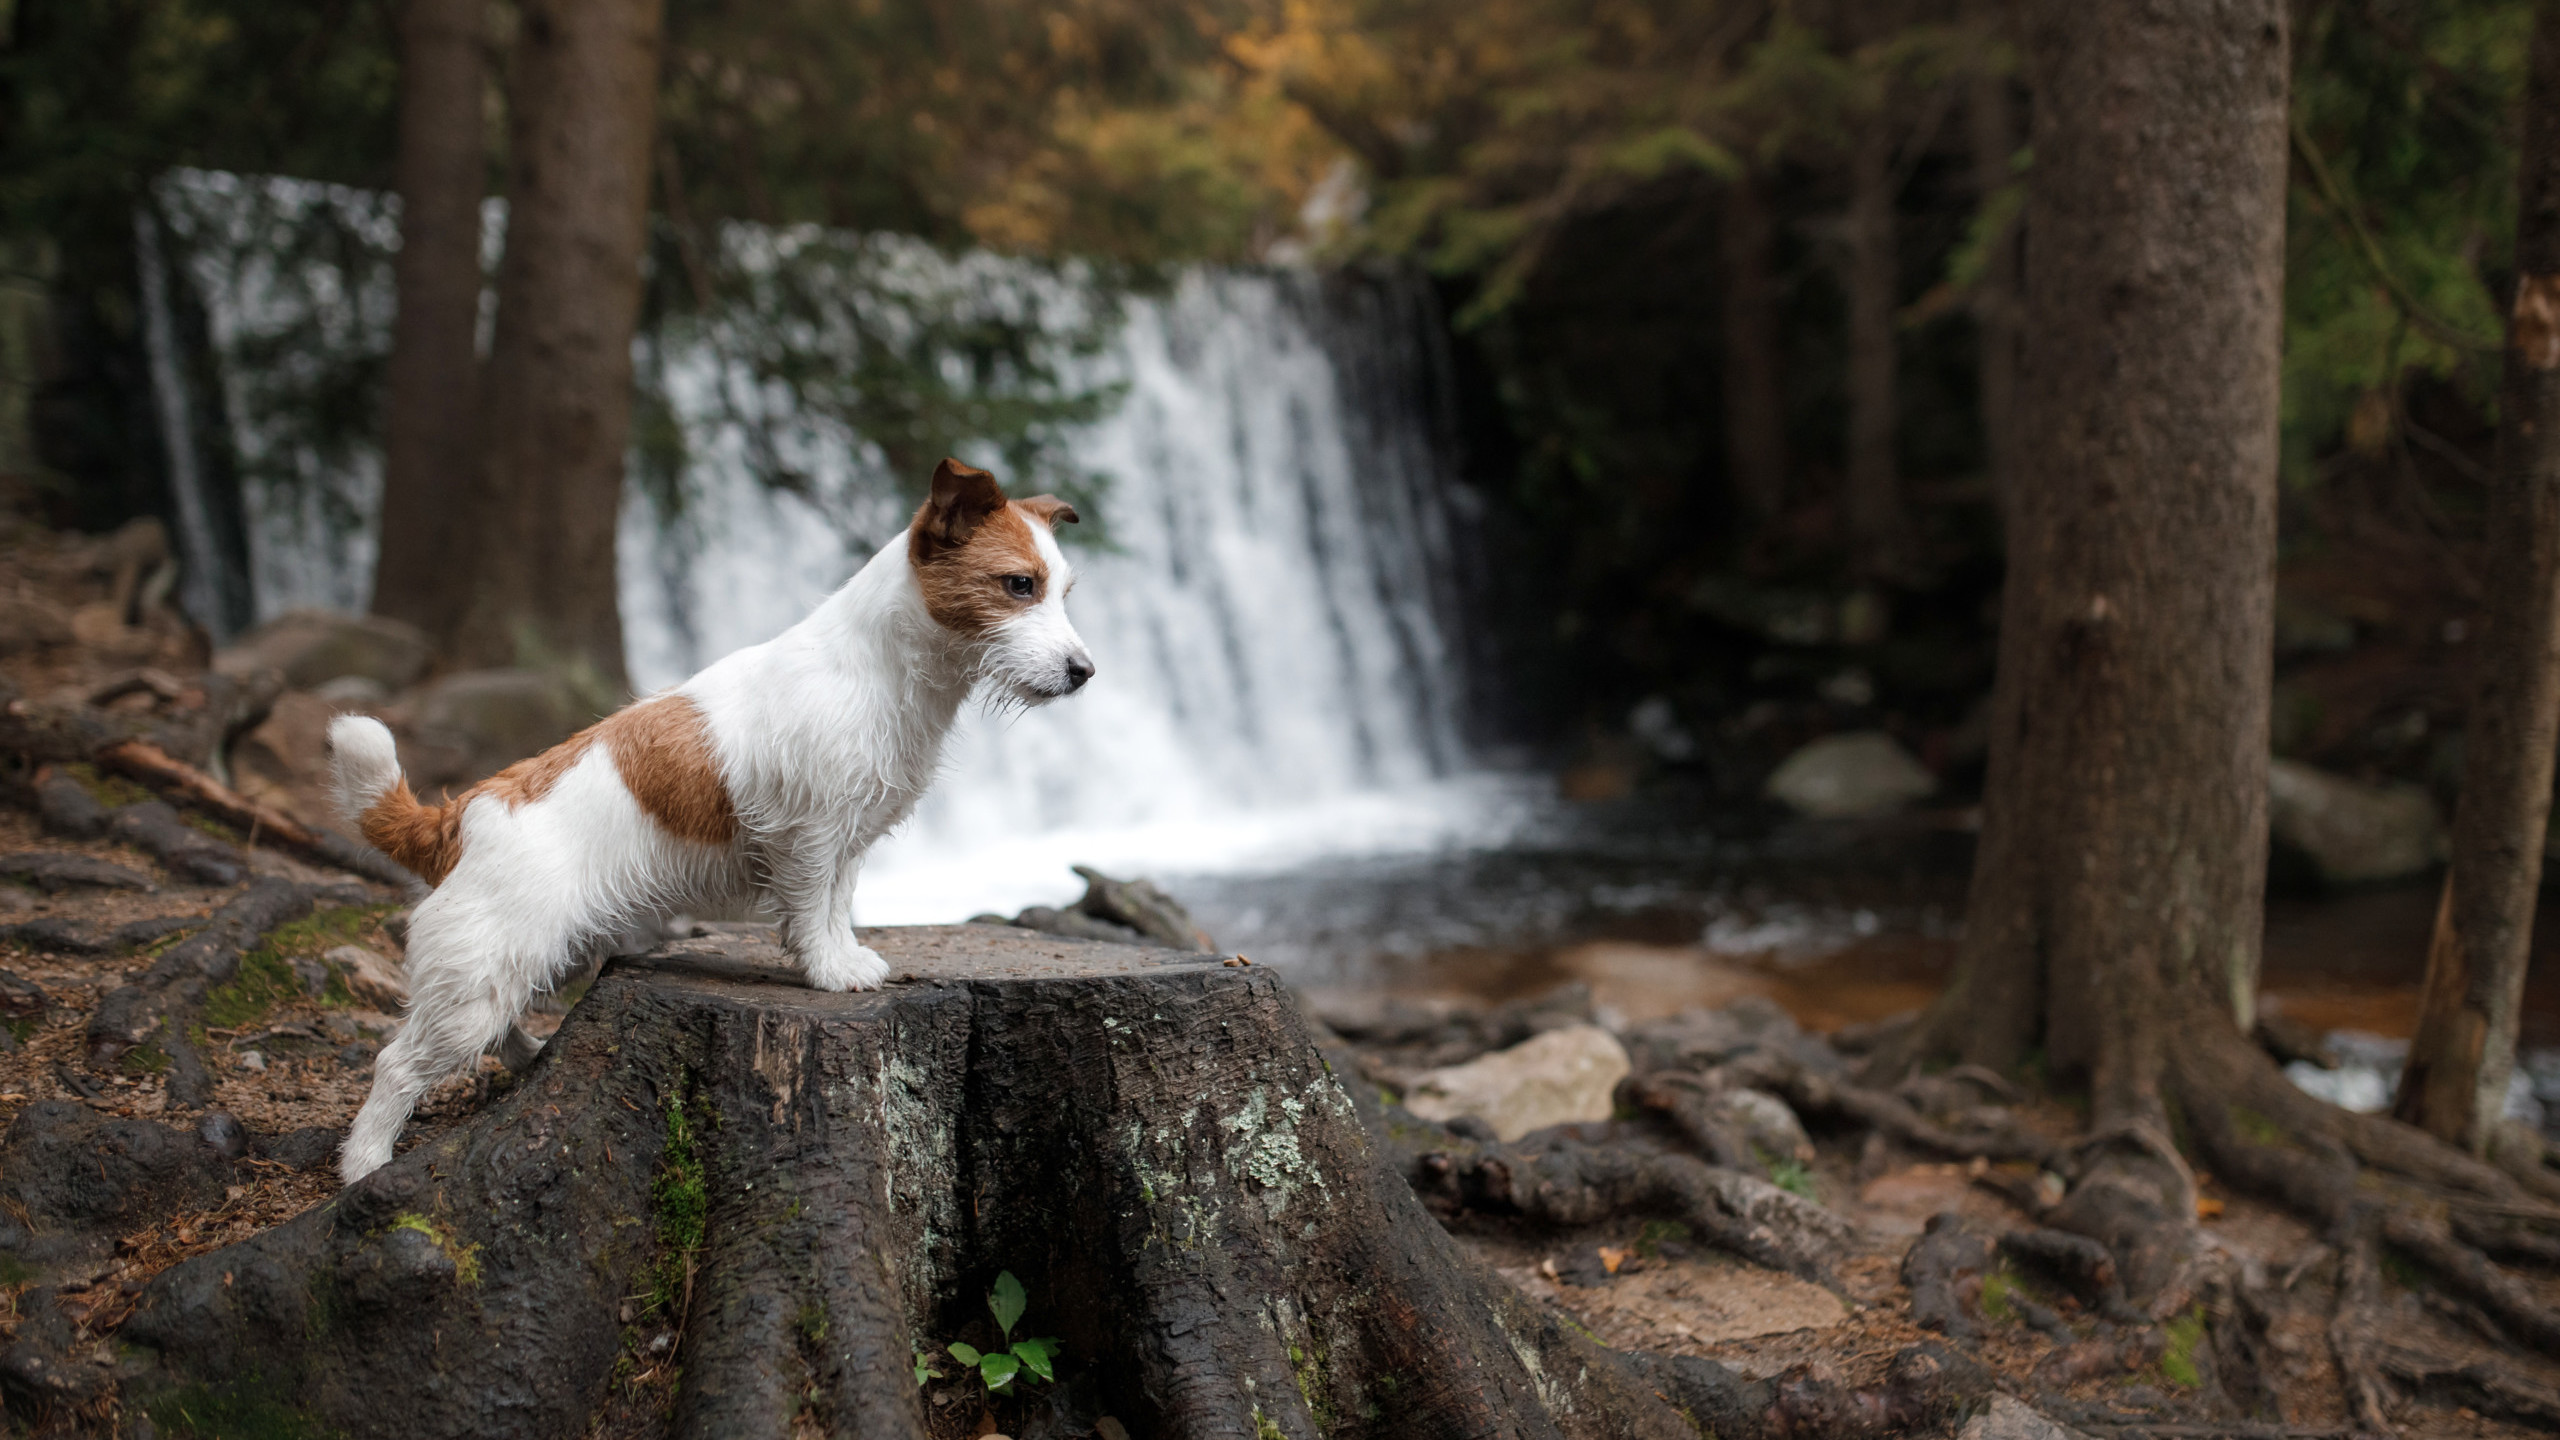 Jack Russell Terrier by a waterfall in Redding